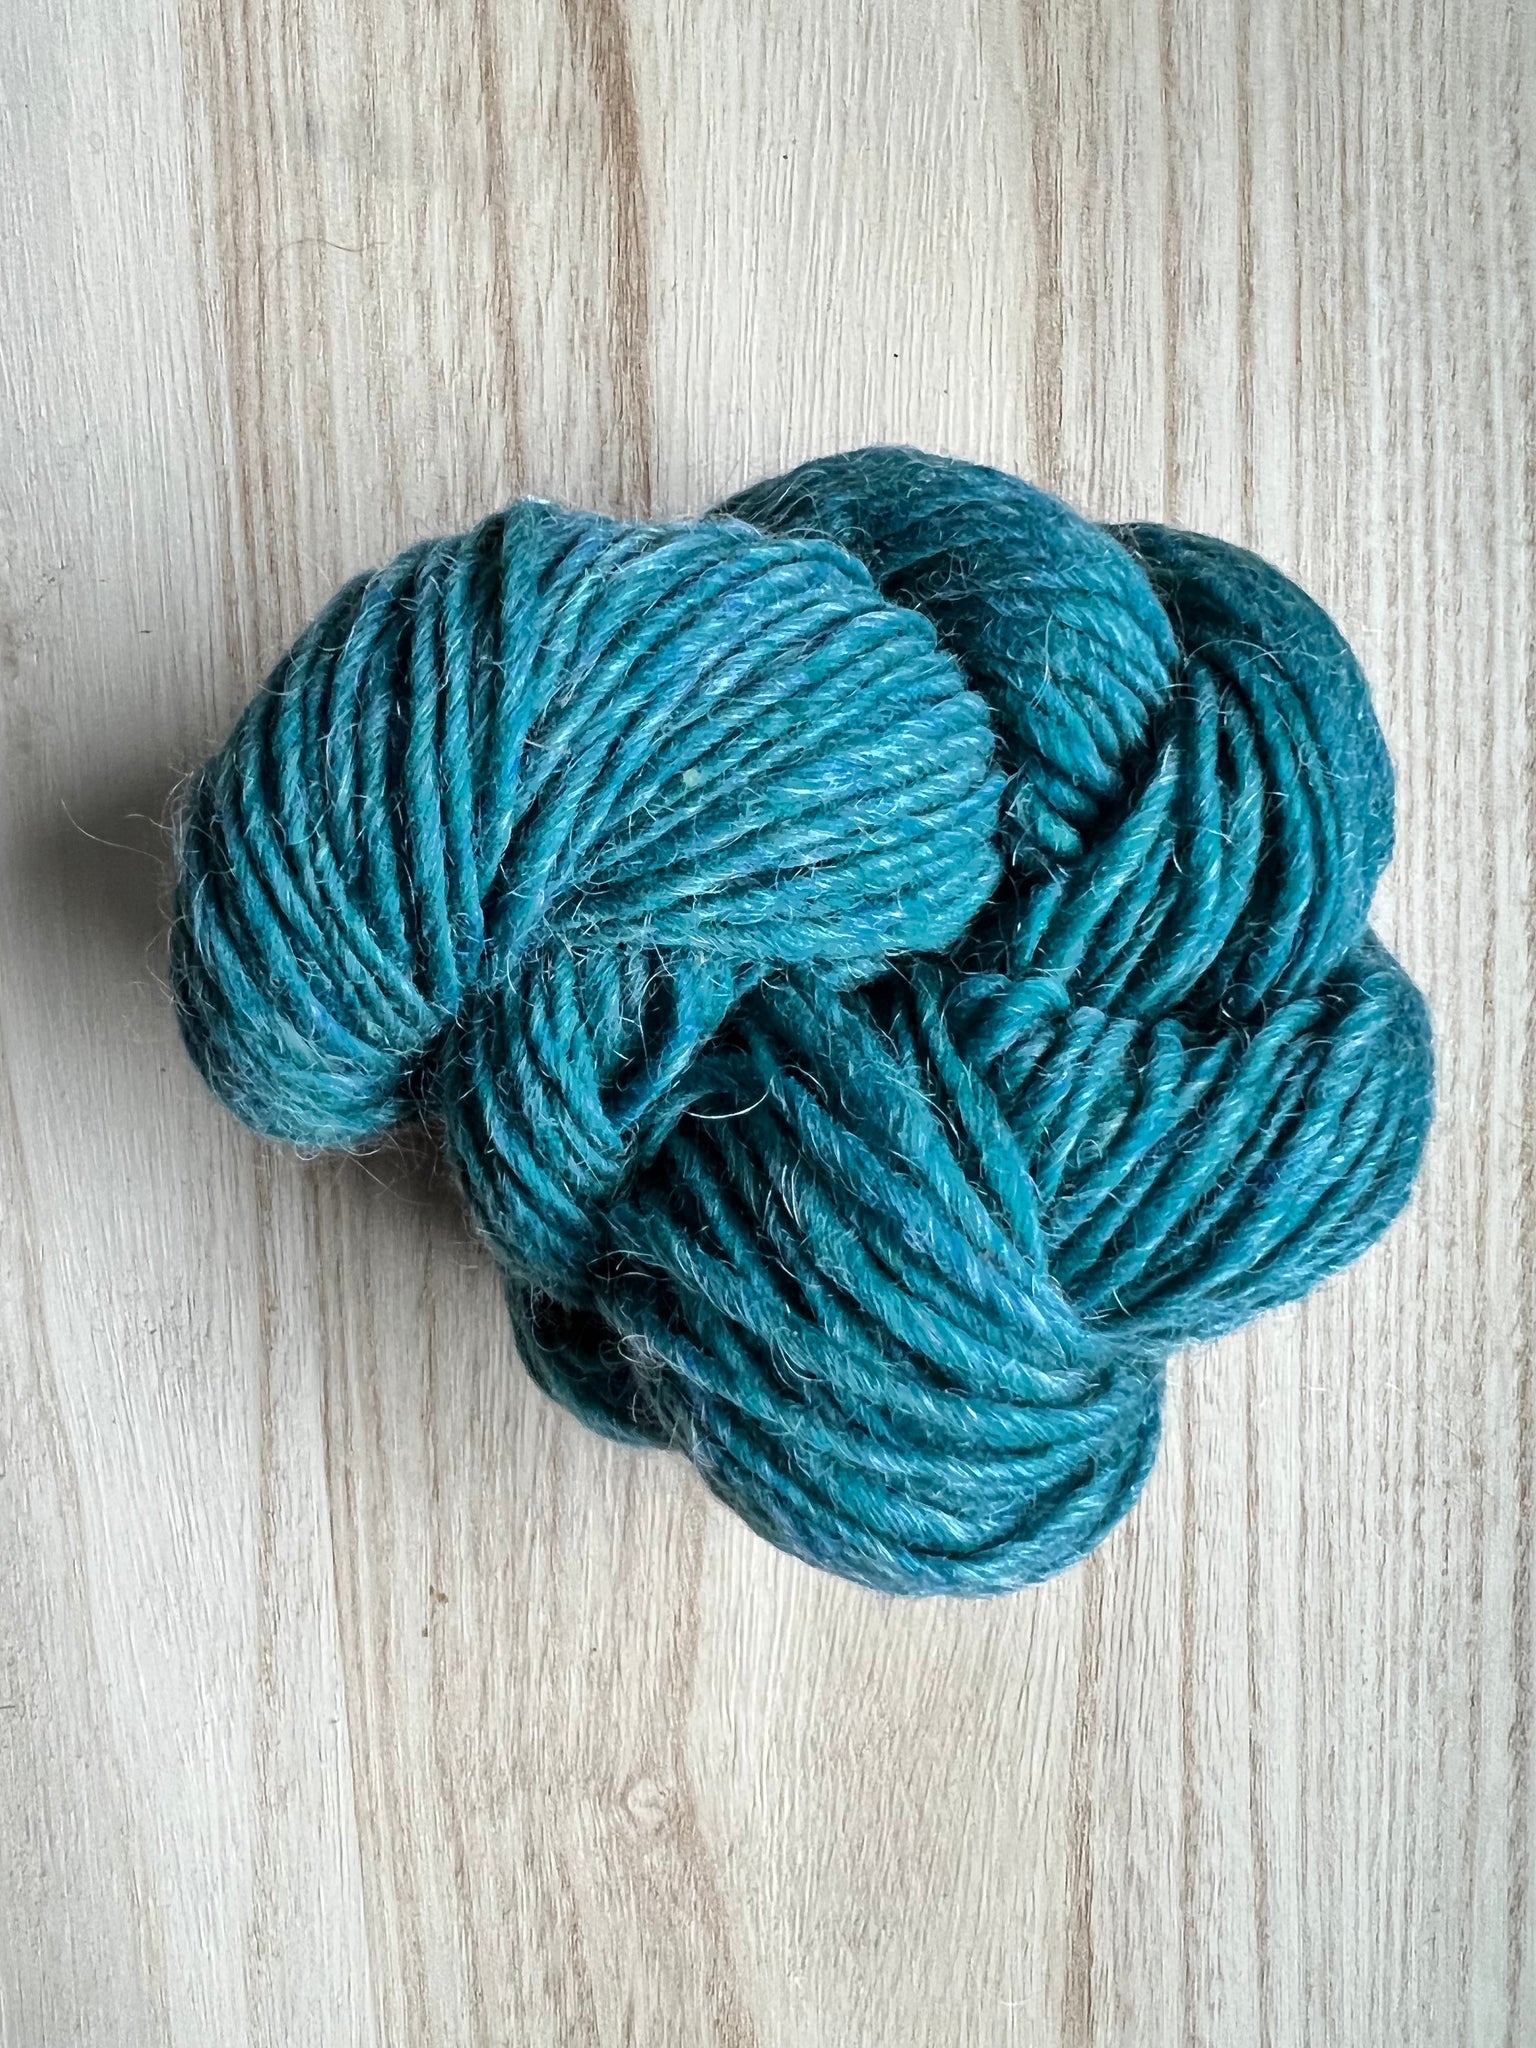 Grey Worsted Mohair Yarn by Dancing the Land Farm